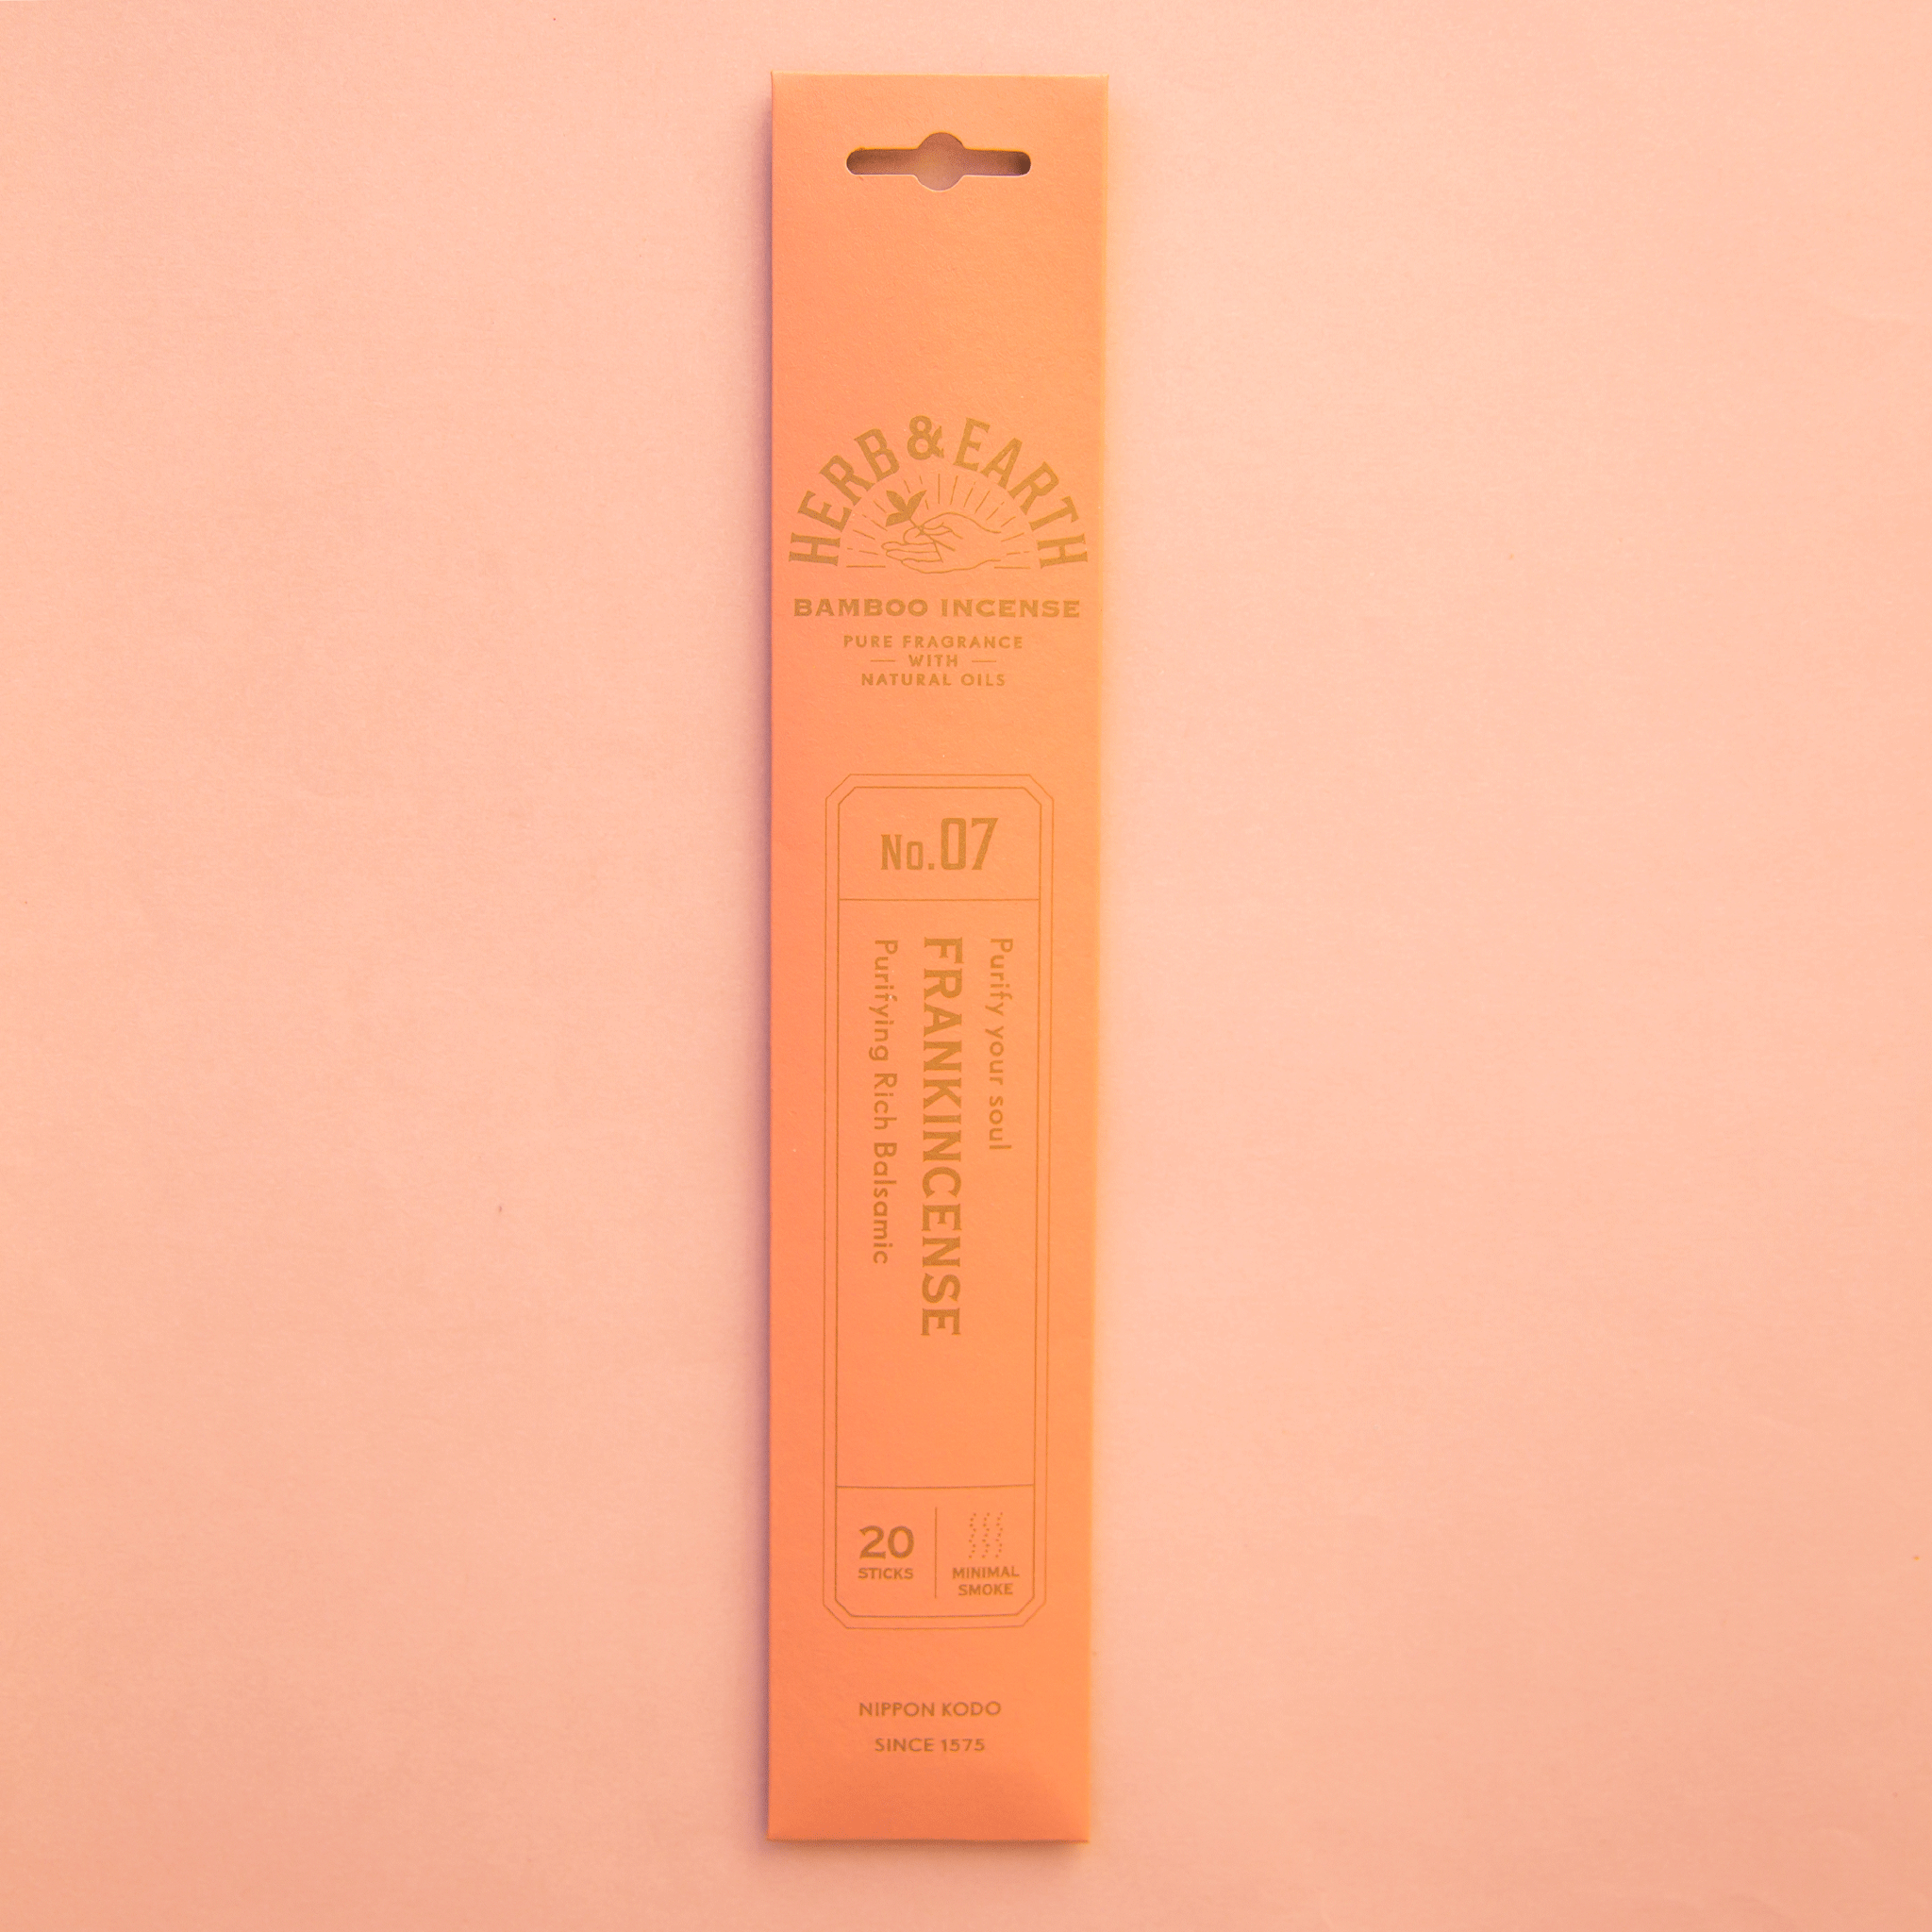 On a peach background is a peachy colored packaging filled with frankincense incense. 